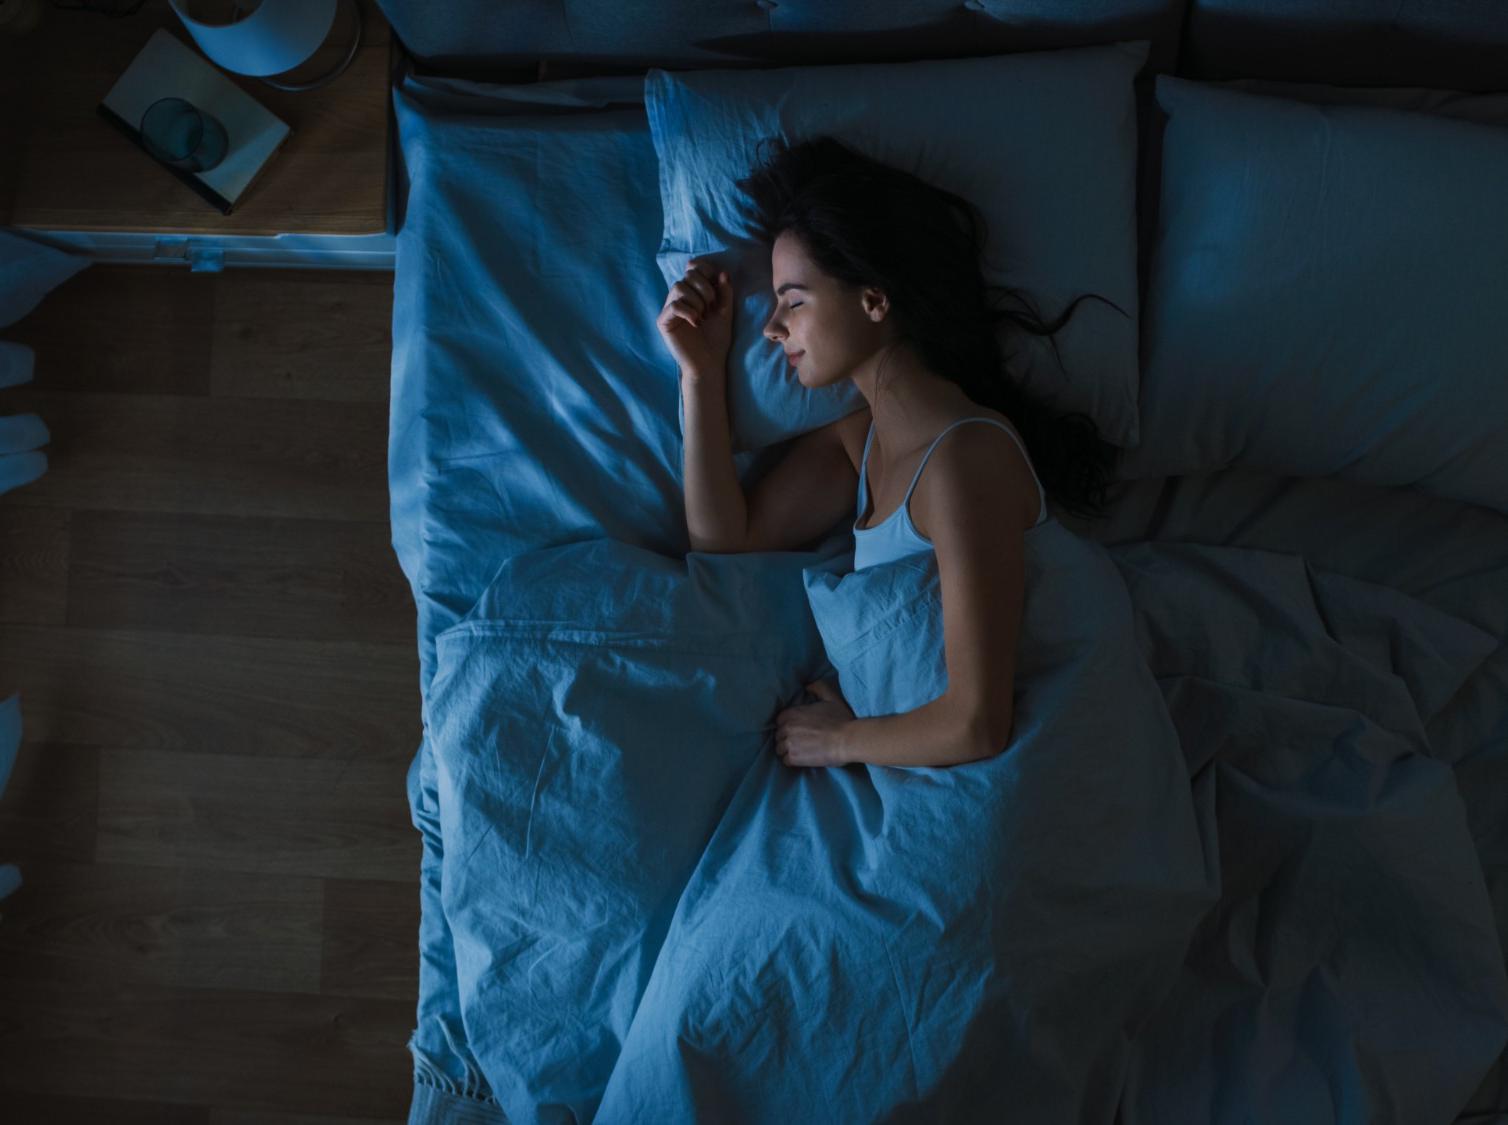 Is Sleeping in Separate Beds Bad for Your Relationship? A Sleep